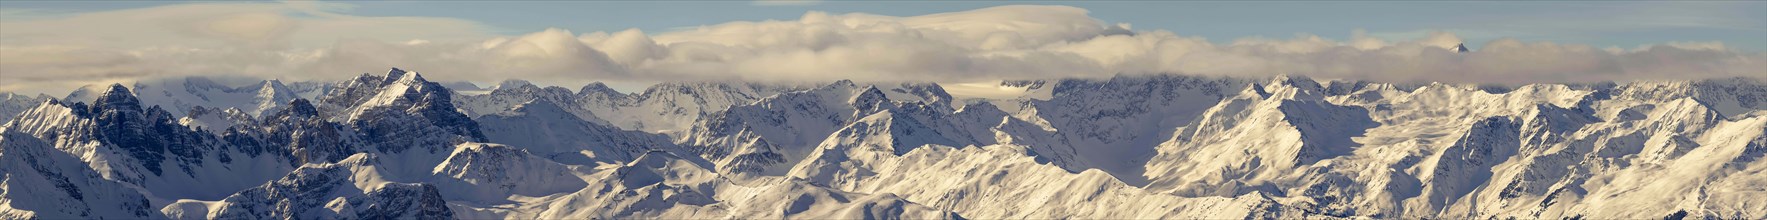 Panorama of the snow-covered Alpine range in winter